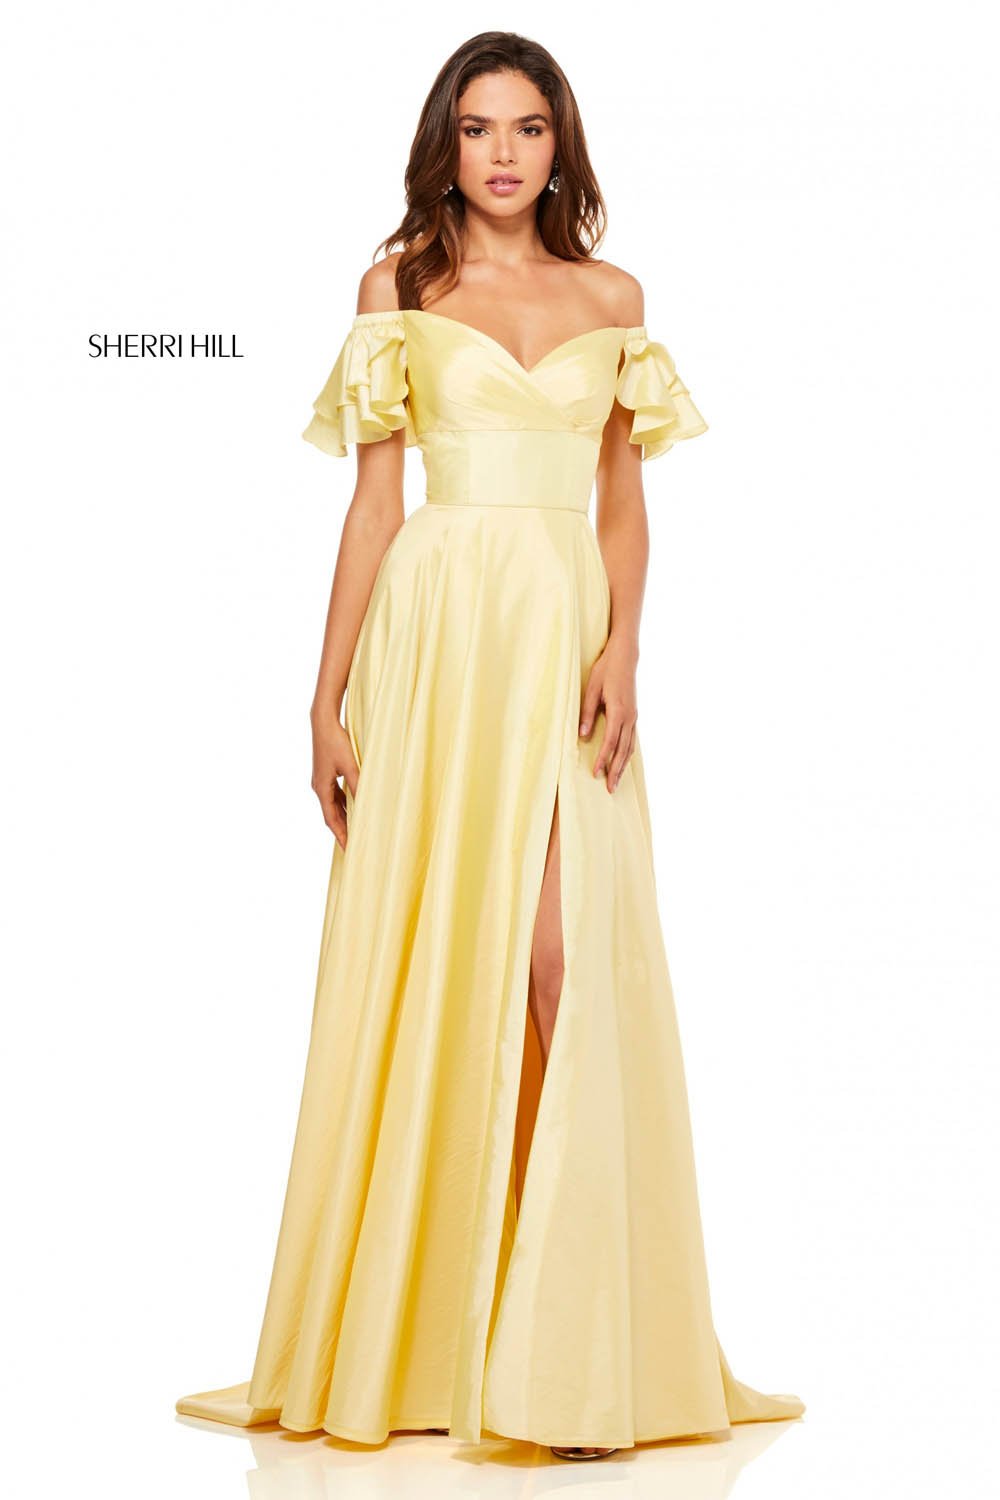 Sherri Hill 52469 dress images in these colors: Yellow, Emerald, Pink, Lilac, Red.